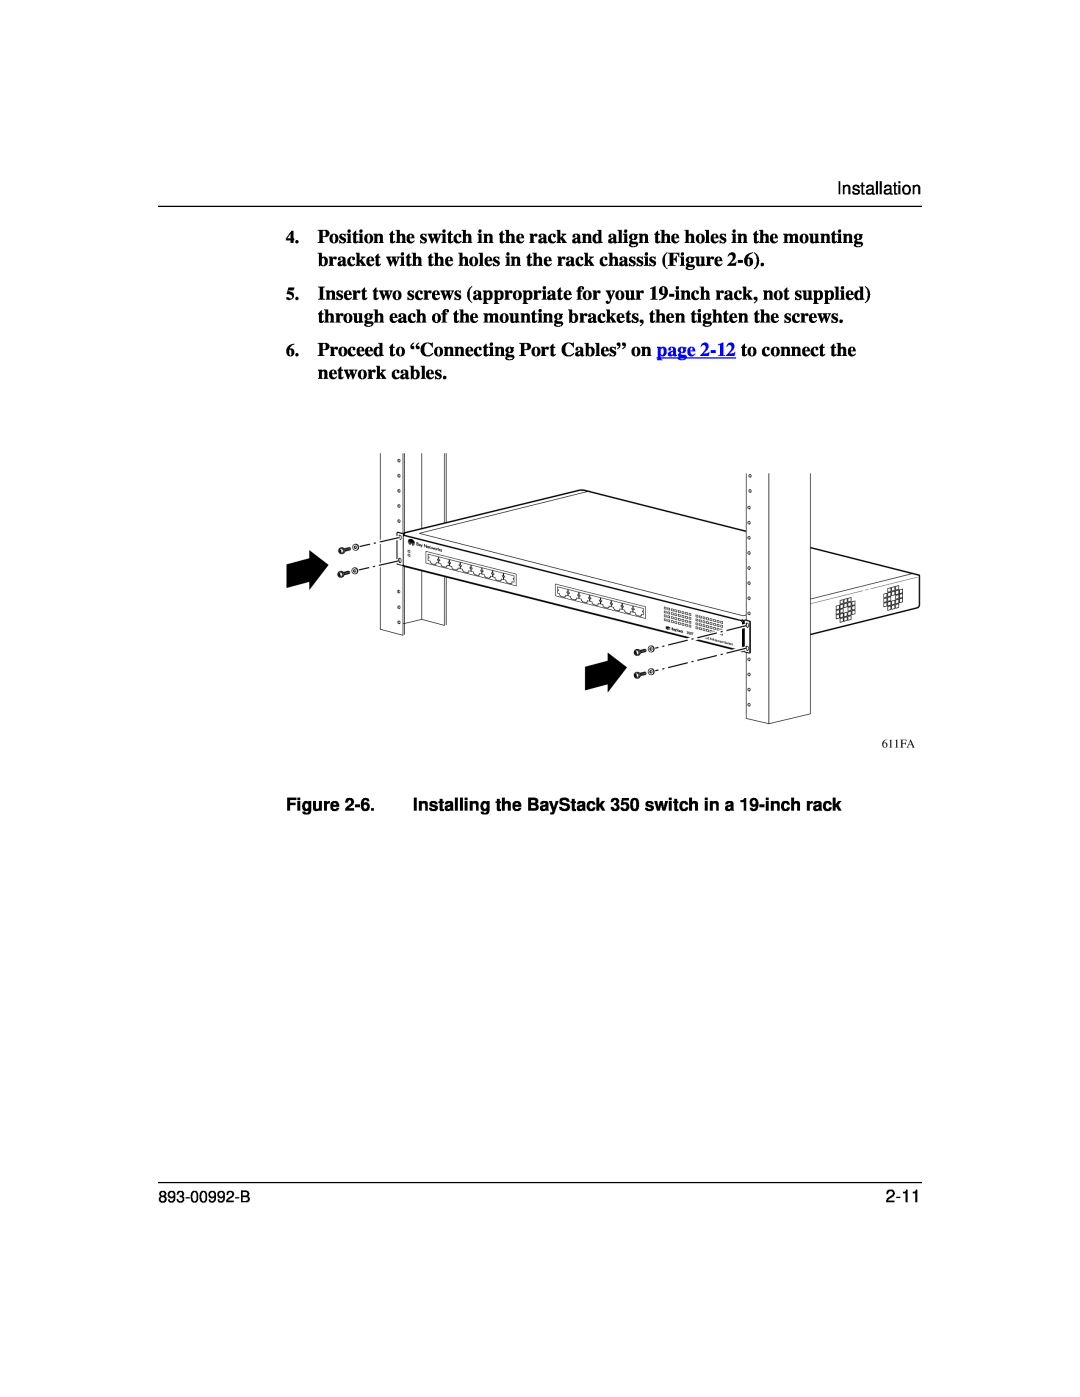 Bay Technical Associates manual 6. Installing the BayStack 350 switch in a 19-inch rack, 611FA 